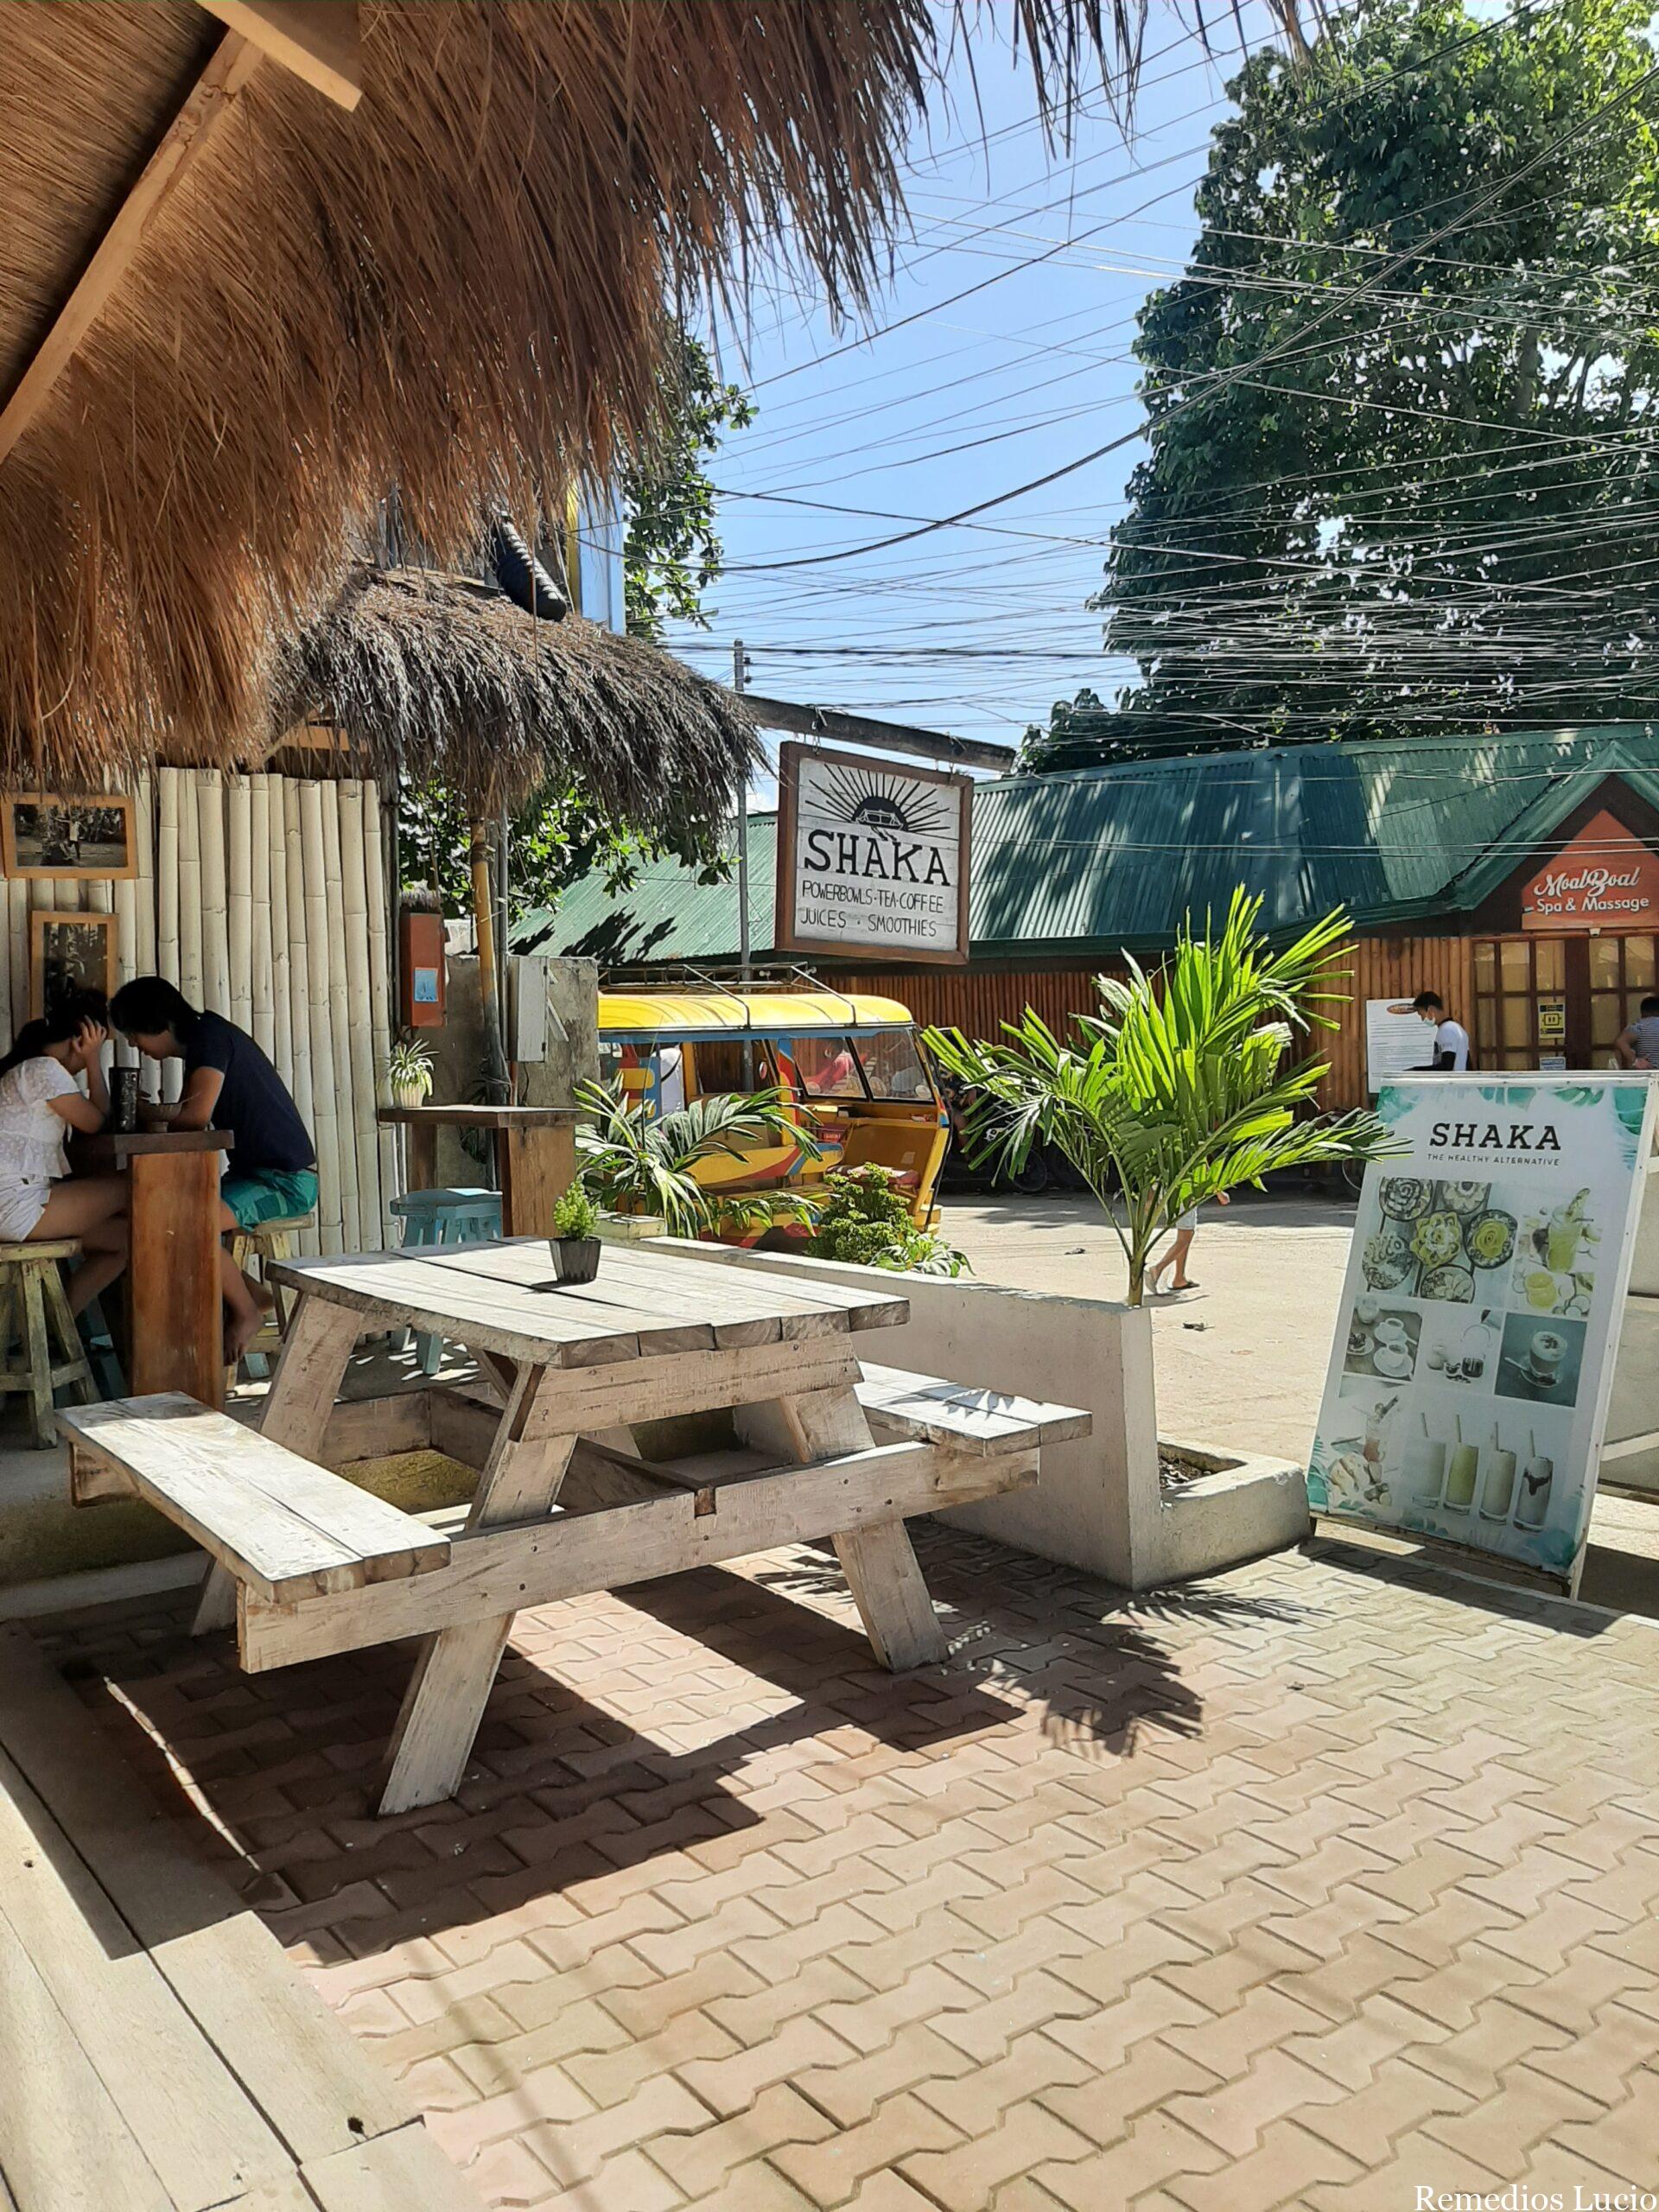 Image of a restaurant